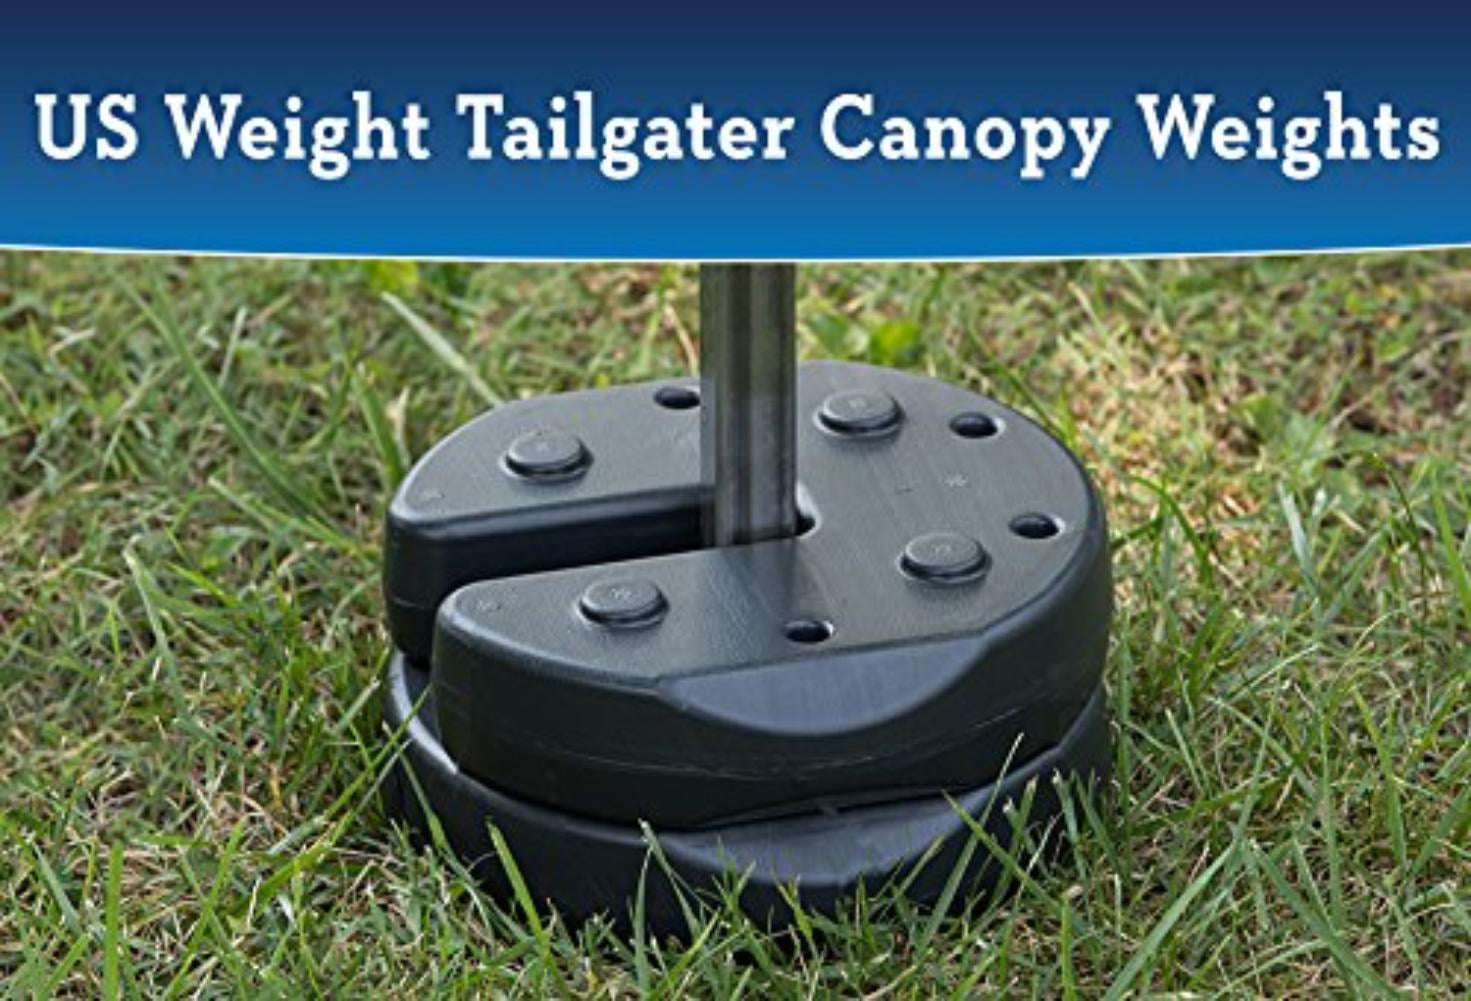 Tailgater Canopy Weights with No-Pinch Design for Easy Safe US Weight 20 lb 